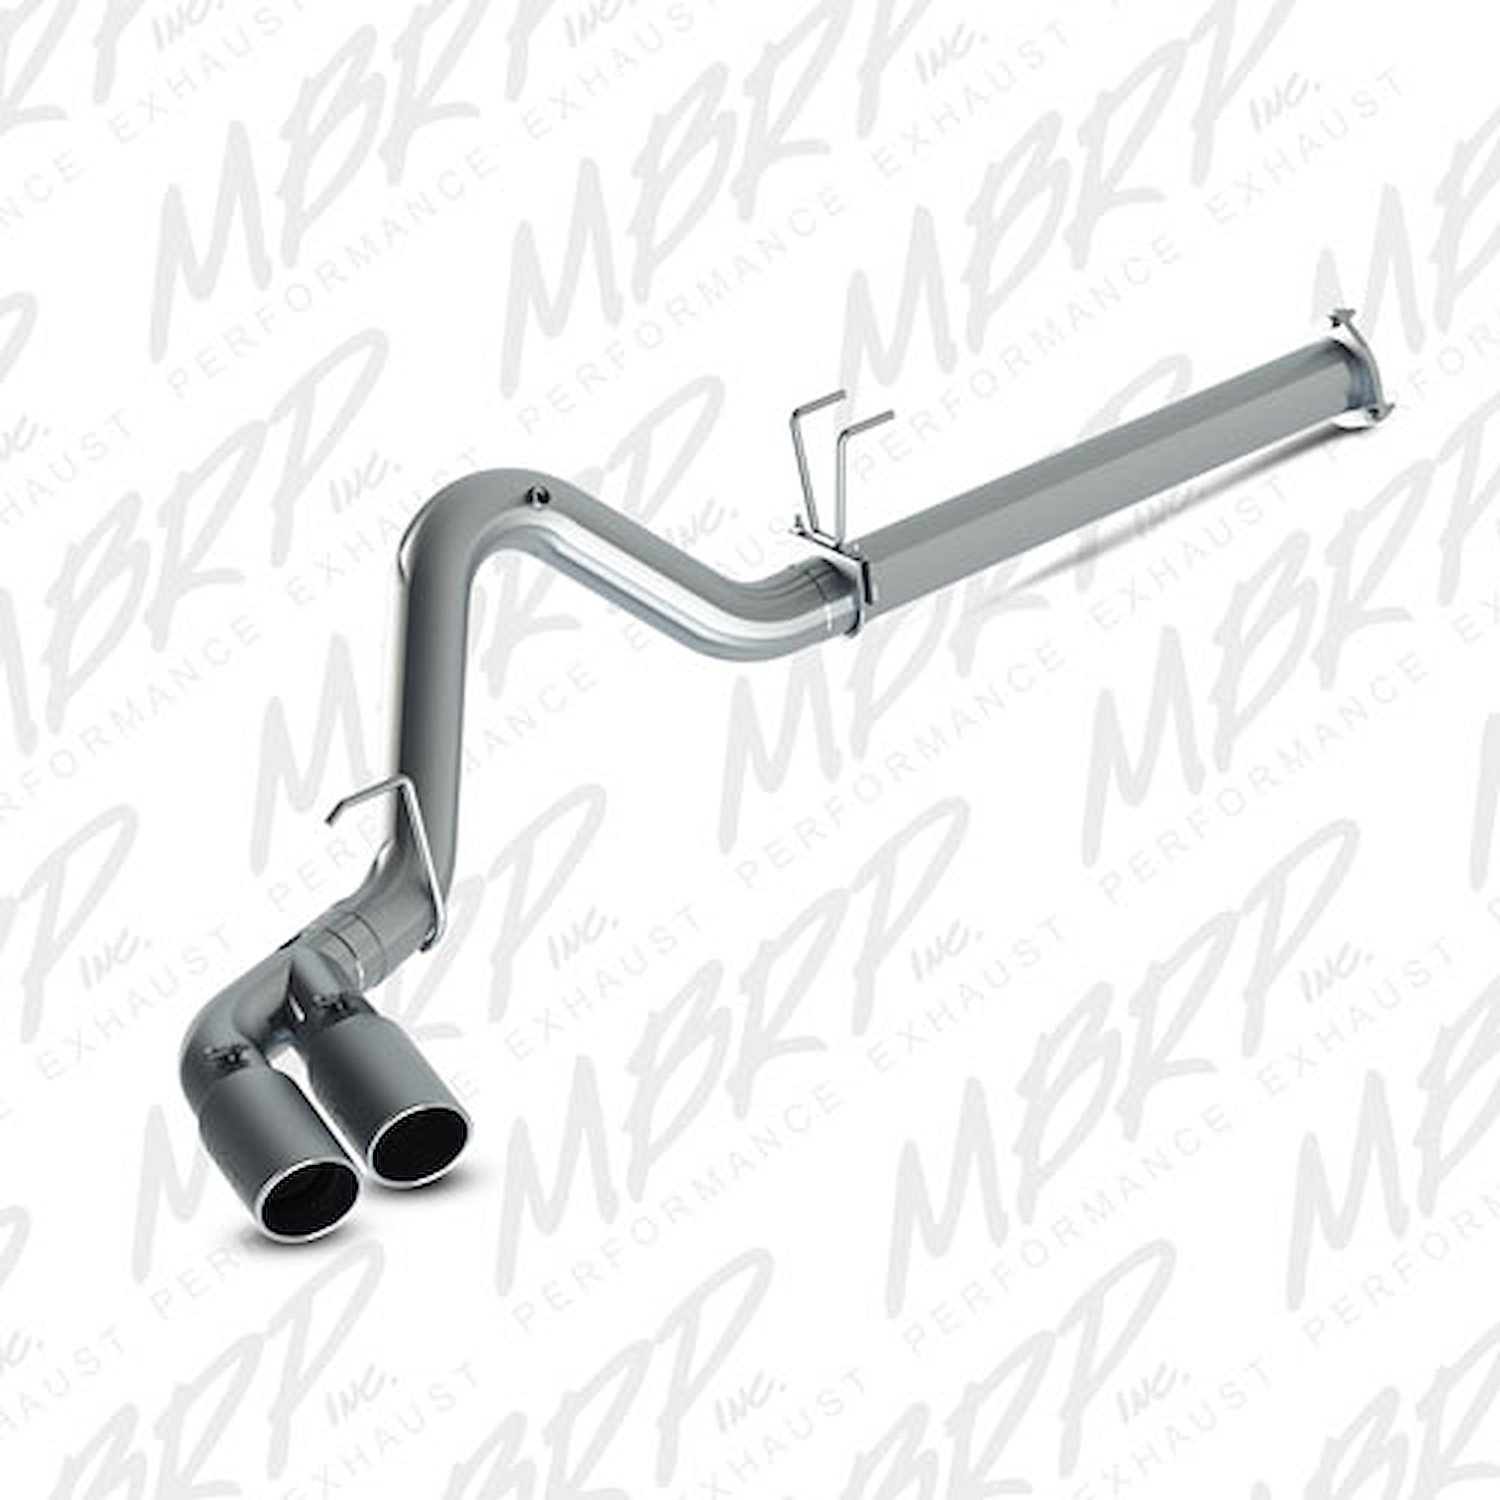 XP Series Exhaust System 2015-16 Ford F-Series 6.7L